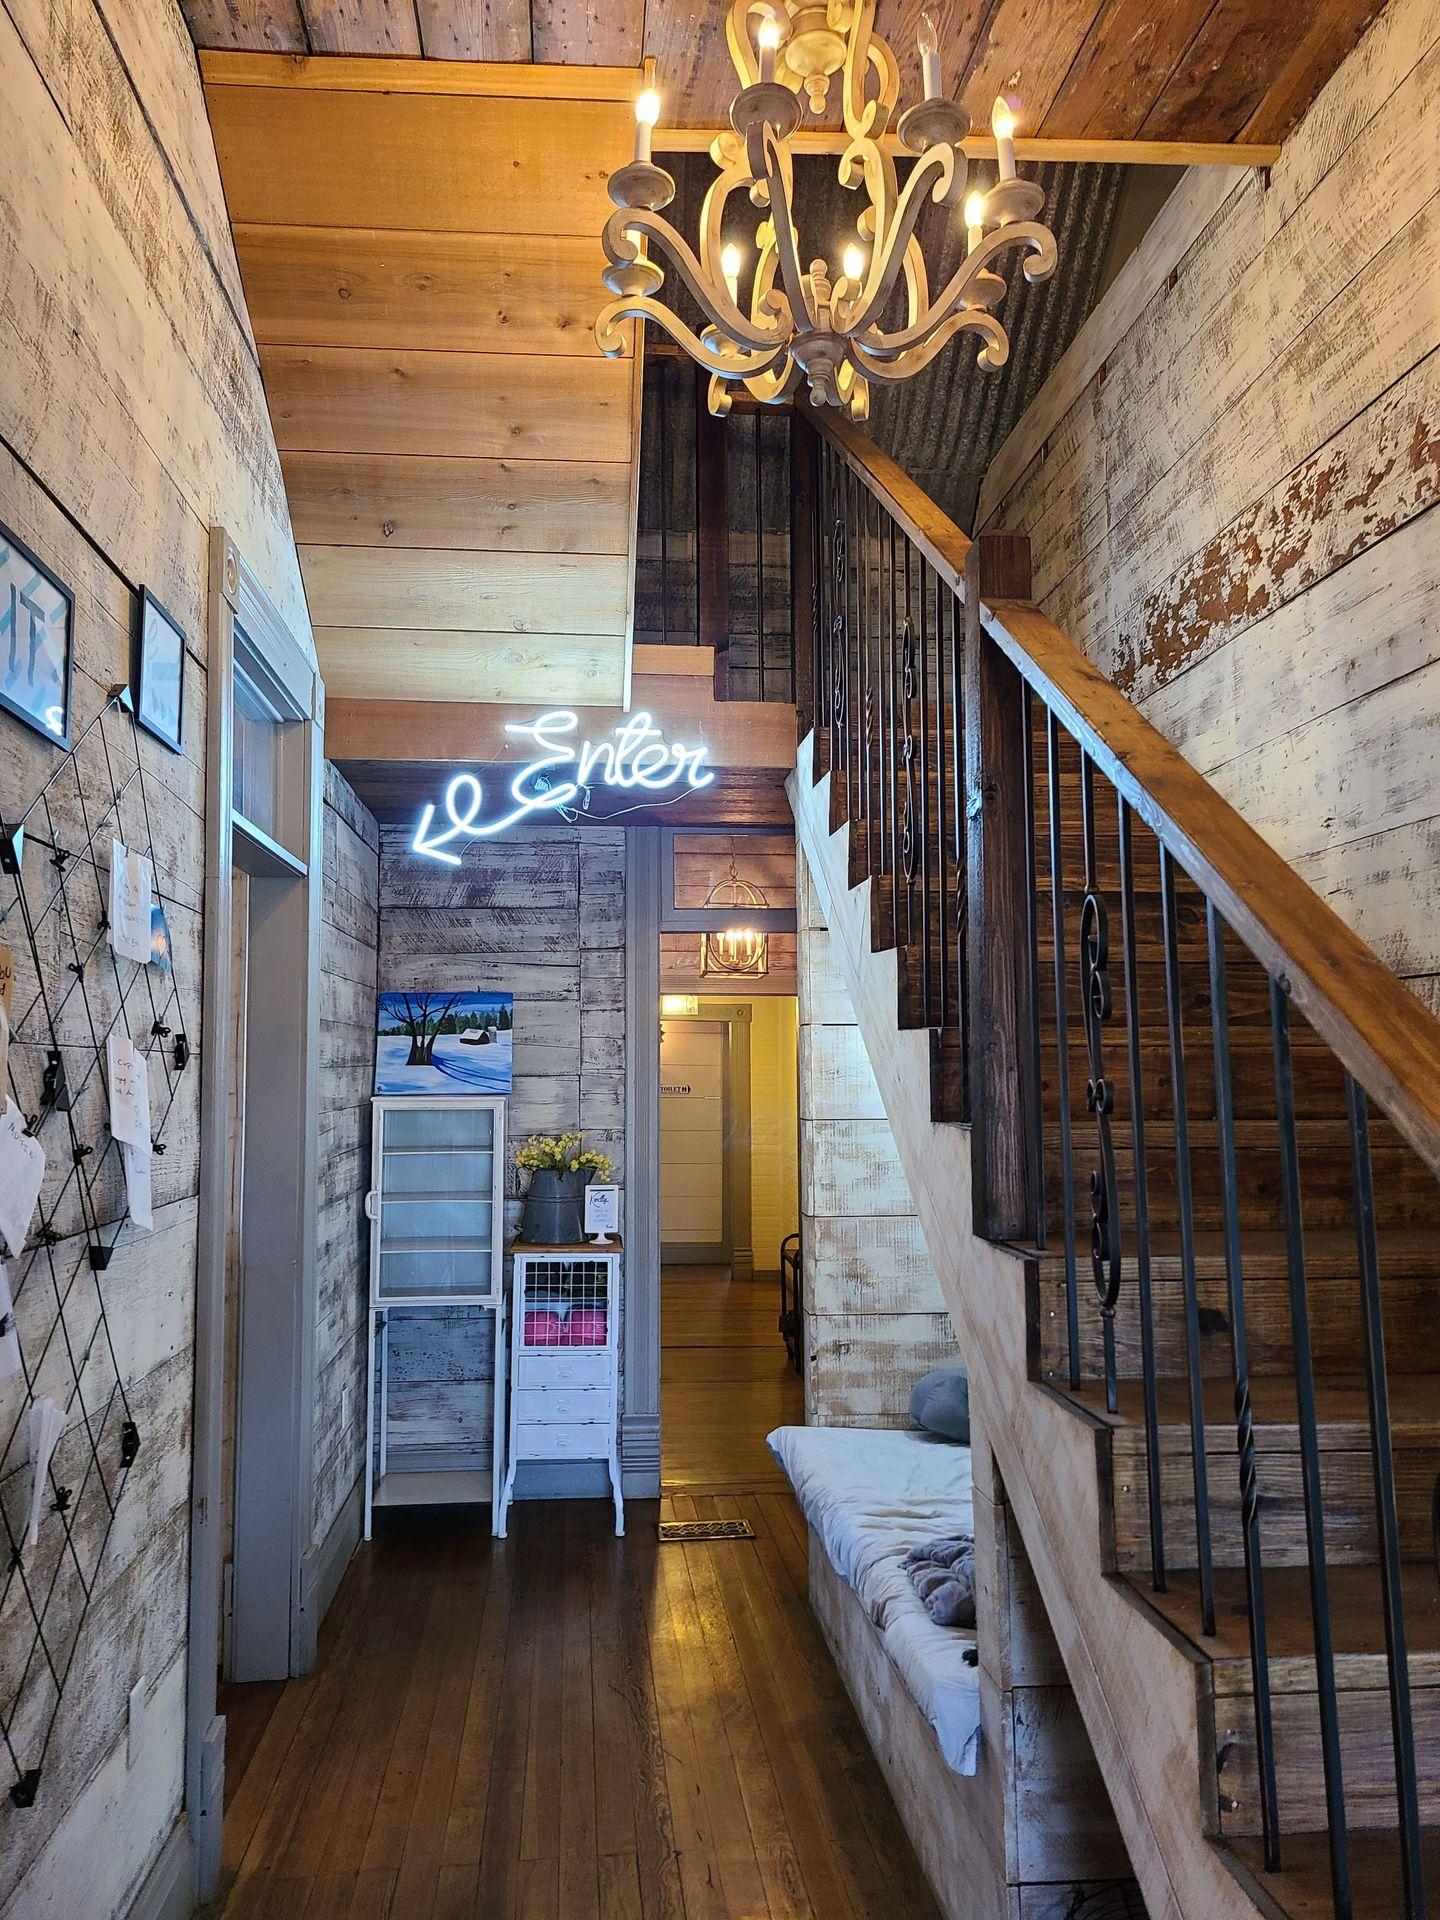 The interior of 2nd Street Bakeshop. There is a staircase, a chandelier and distressed wood on the walls. In the back of the hallway, a neon sign reads Enter with an arrow pointing left.